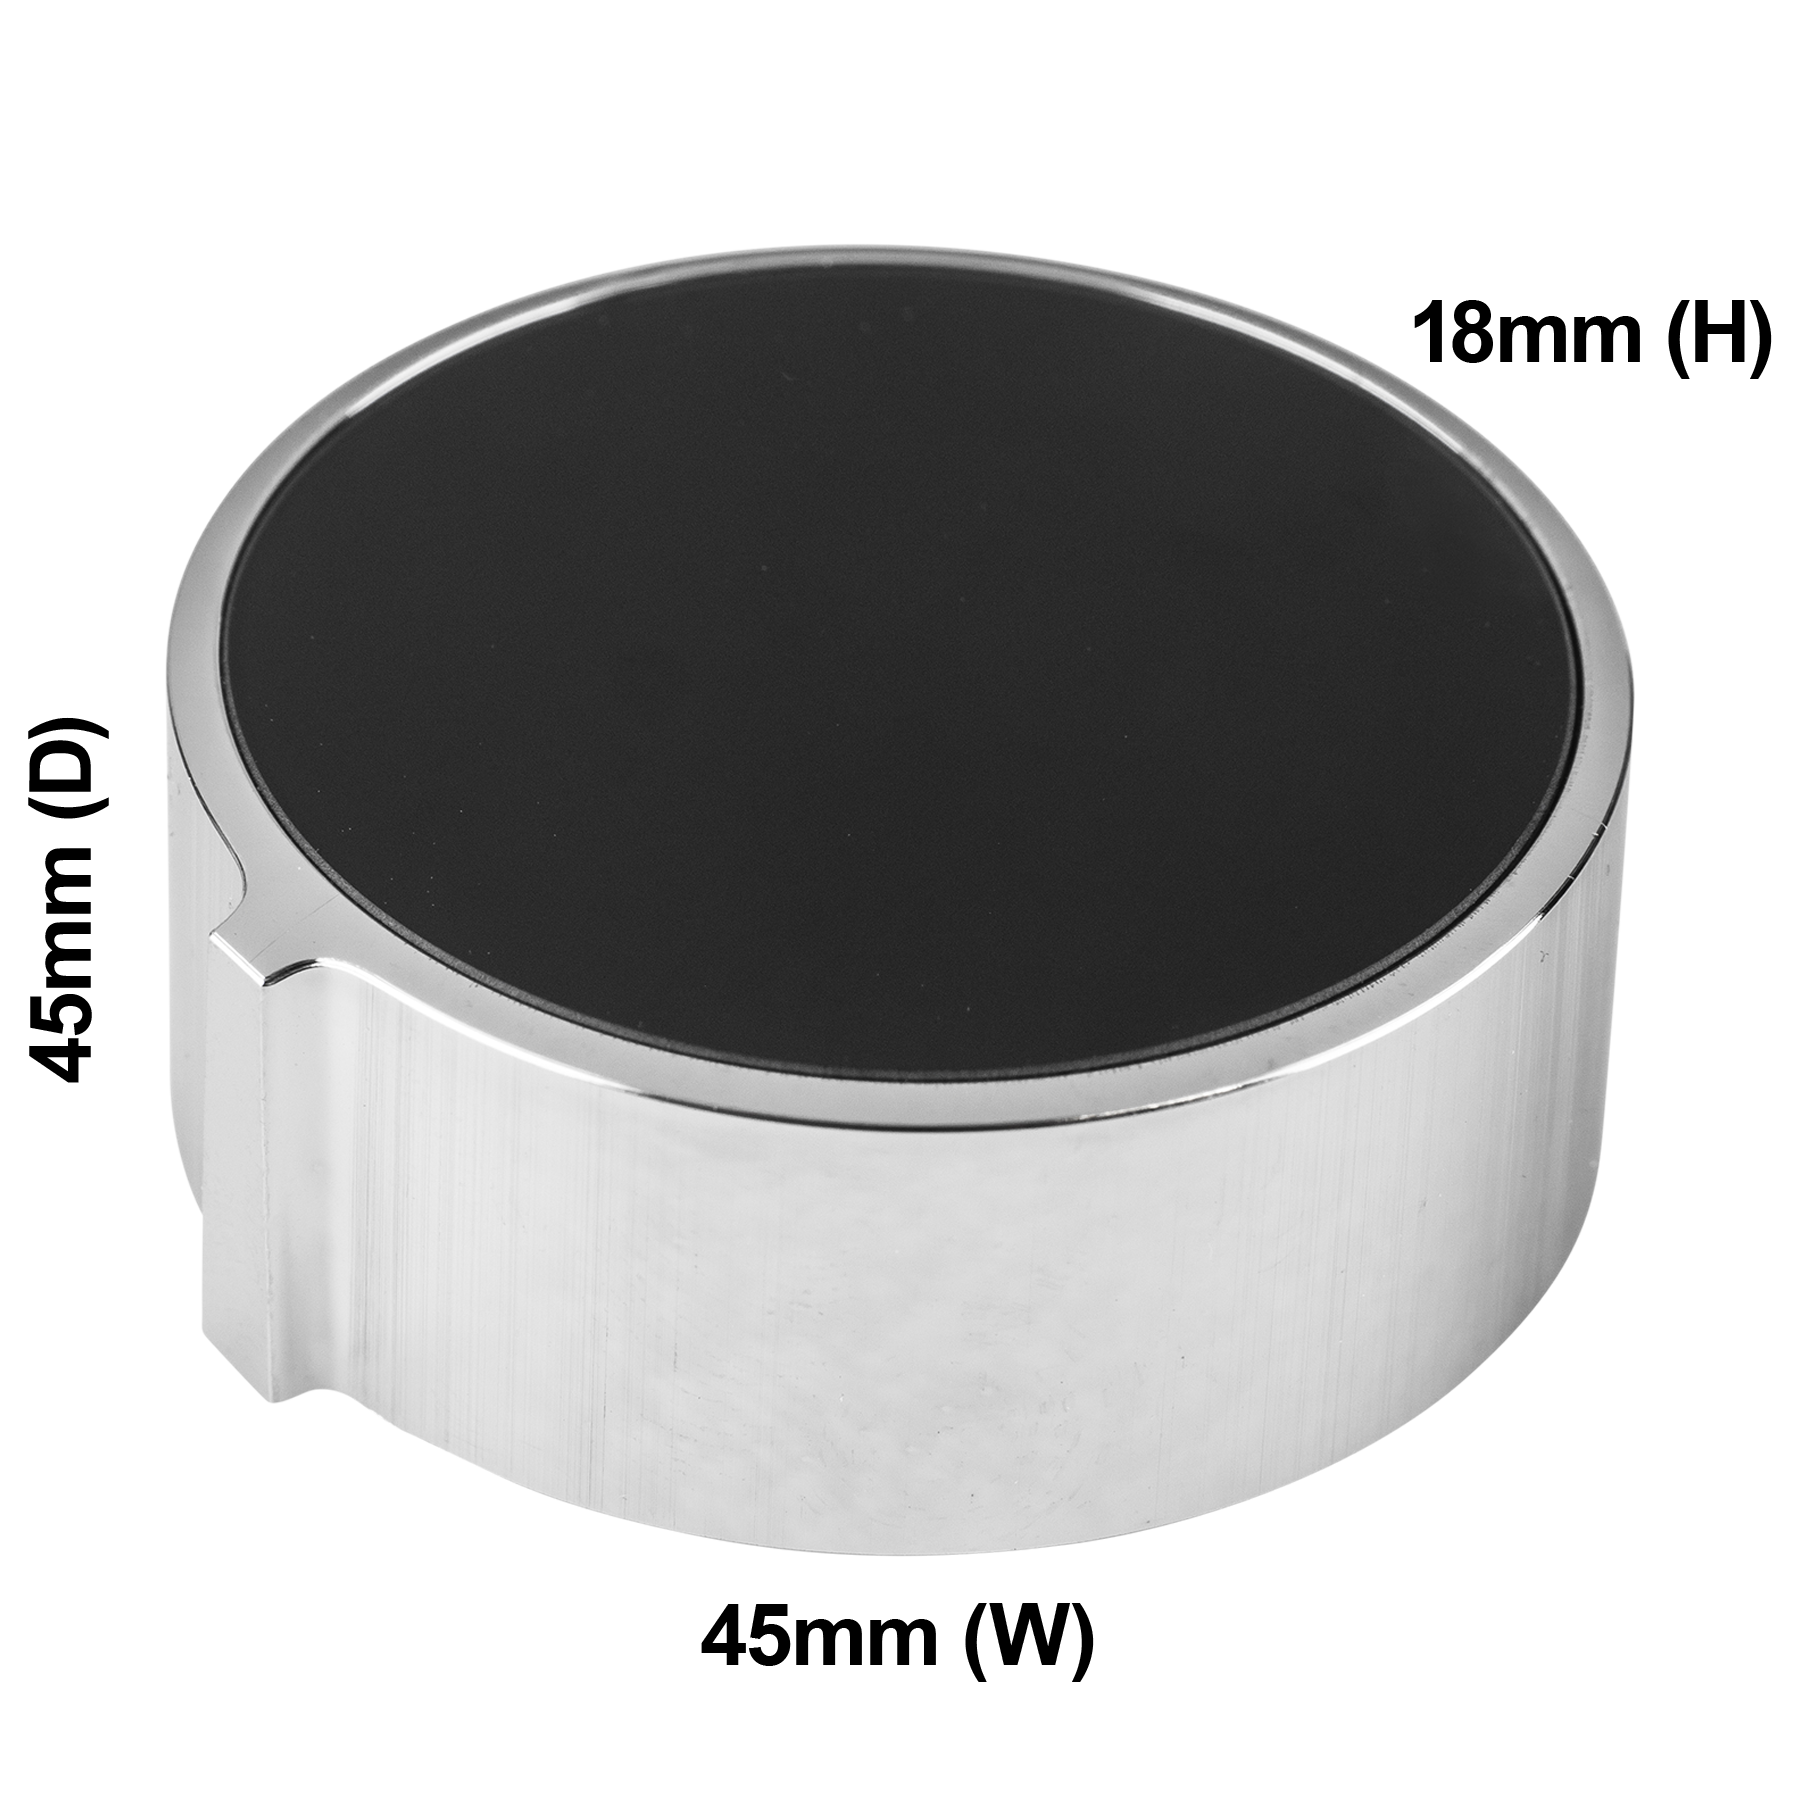 /globalassets/0-spareparts/sku0019008192-knob-control-assembly--stainless-steel-face-front.png